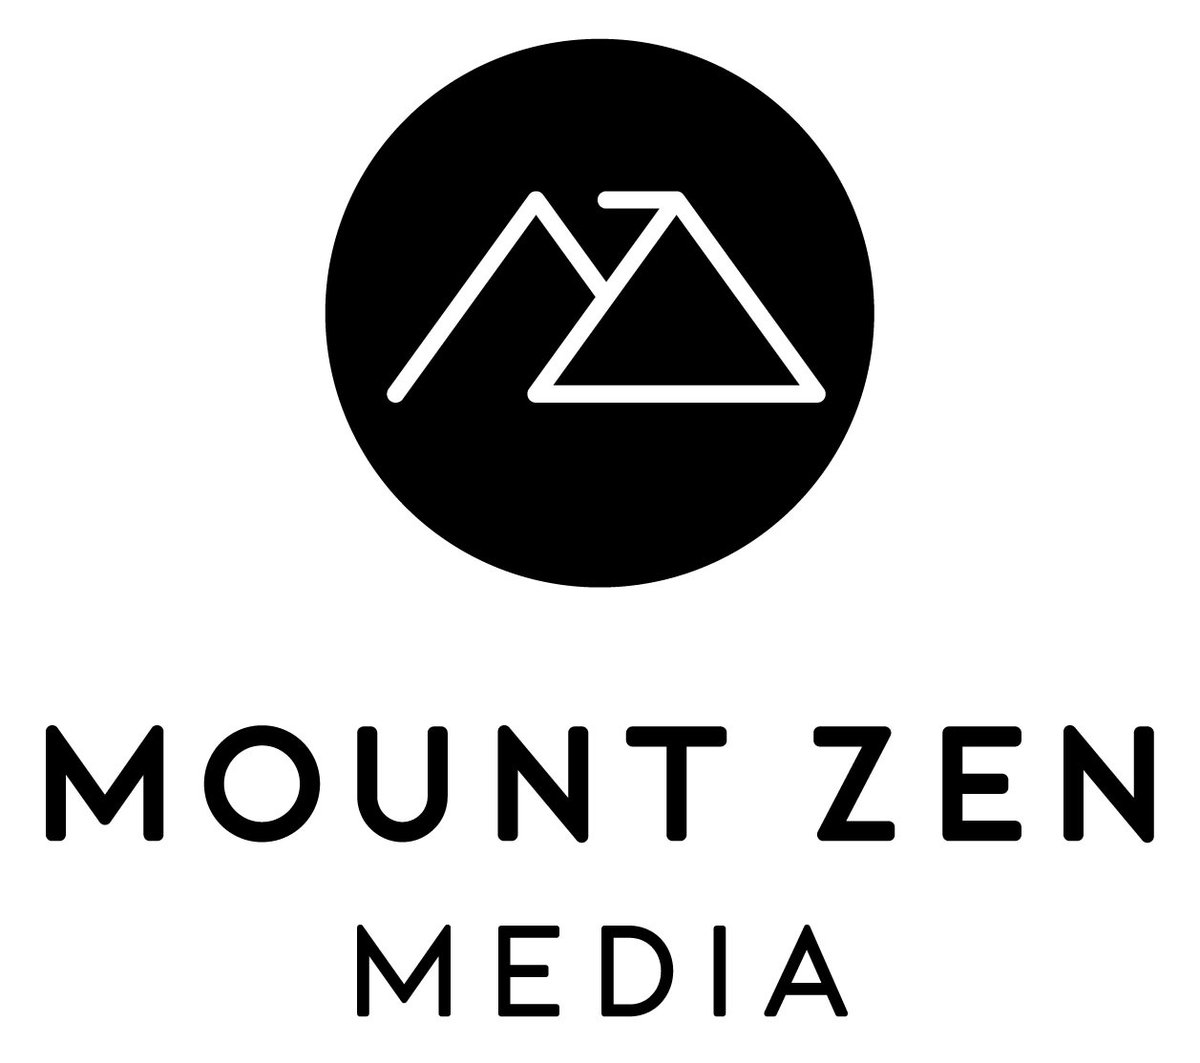 .@Nindusanj and @AftabShivdasani announce their production company, @MountZenMedia, the husband and wife duo have partnered to create content ranging from films, online shows, and documentaries. #AftabShivdasani #NinDusanjShivdasani #MountZenMedia